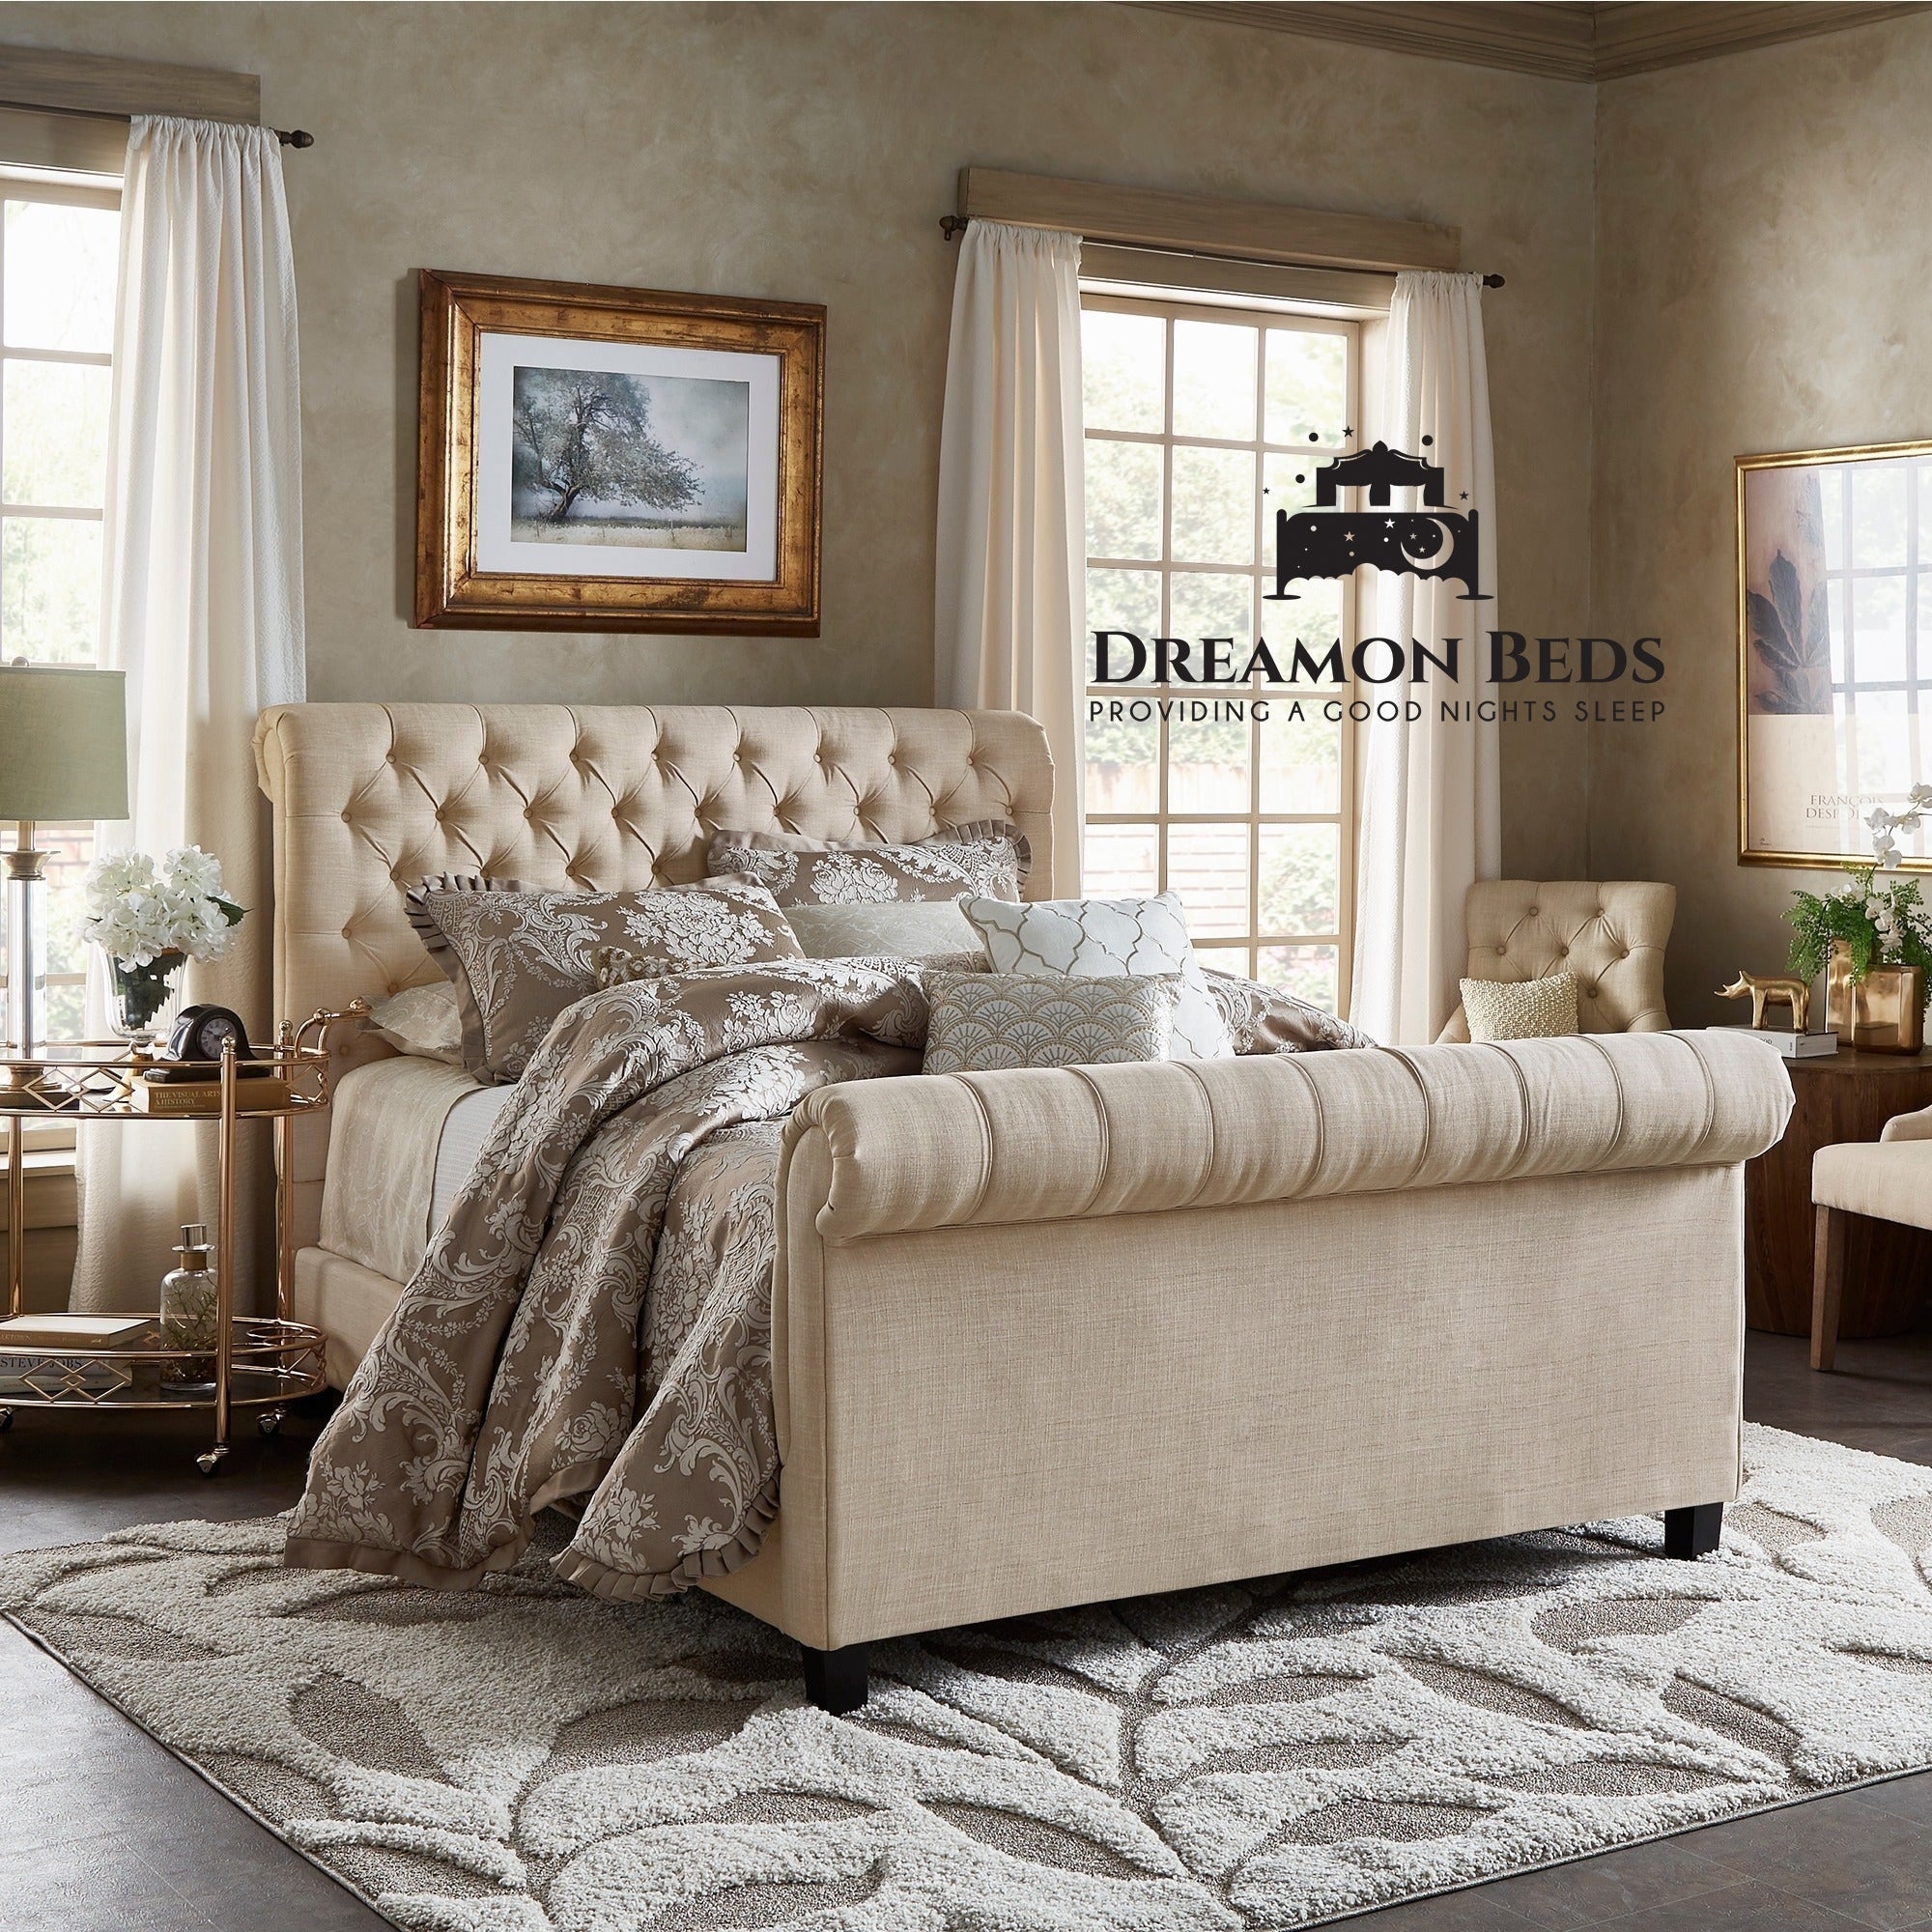 Emperor Luxury Scroll Bed Frame – Endless Customisation – Choice Of 25 Colours & Materials – Dreamon Beds